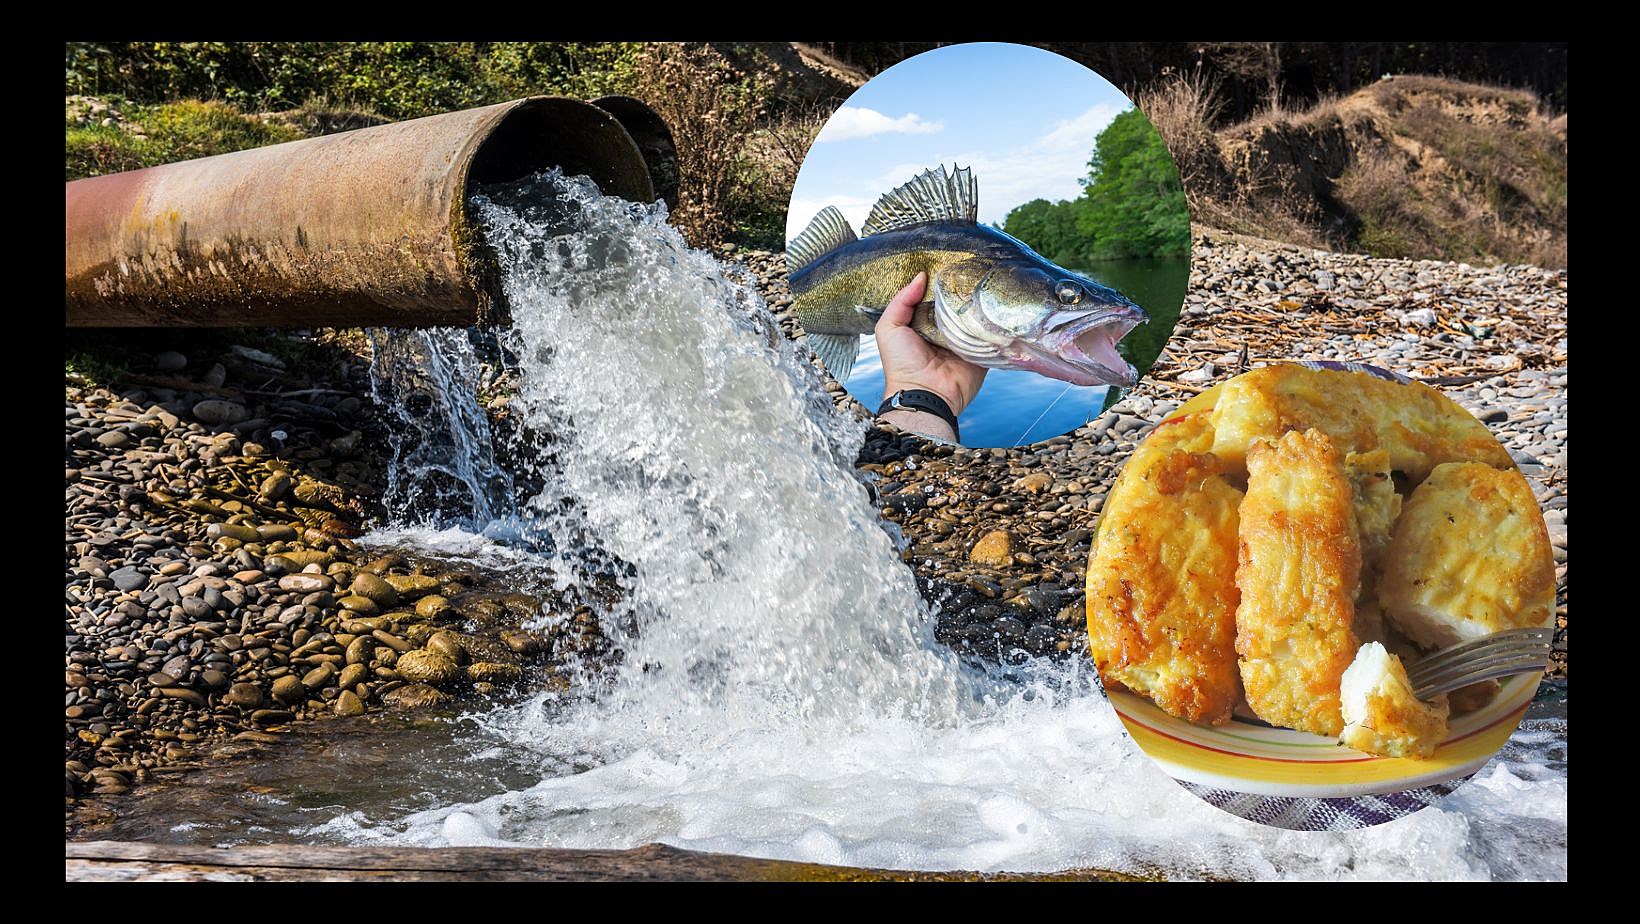 Fish You Should Avoid Eating In Iowa, Illinois, & Wisconsin